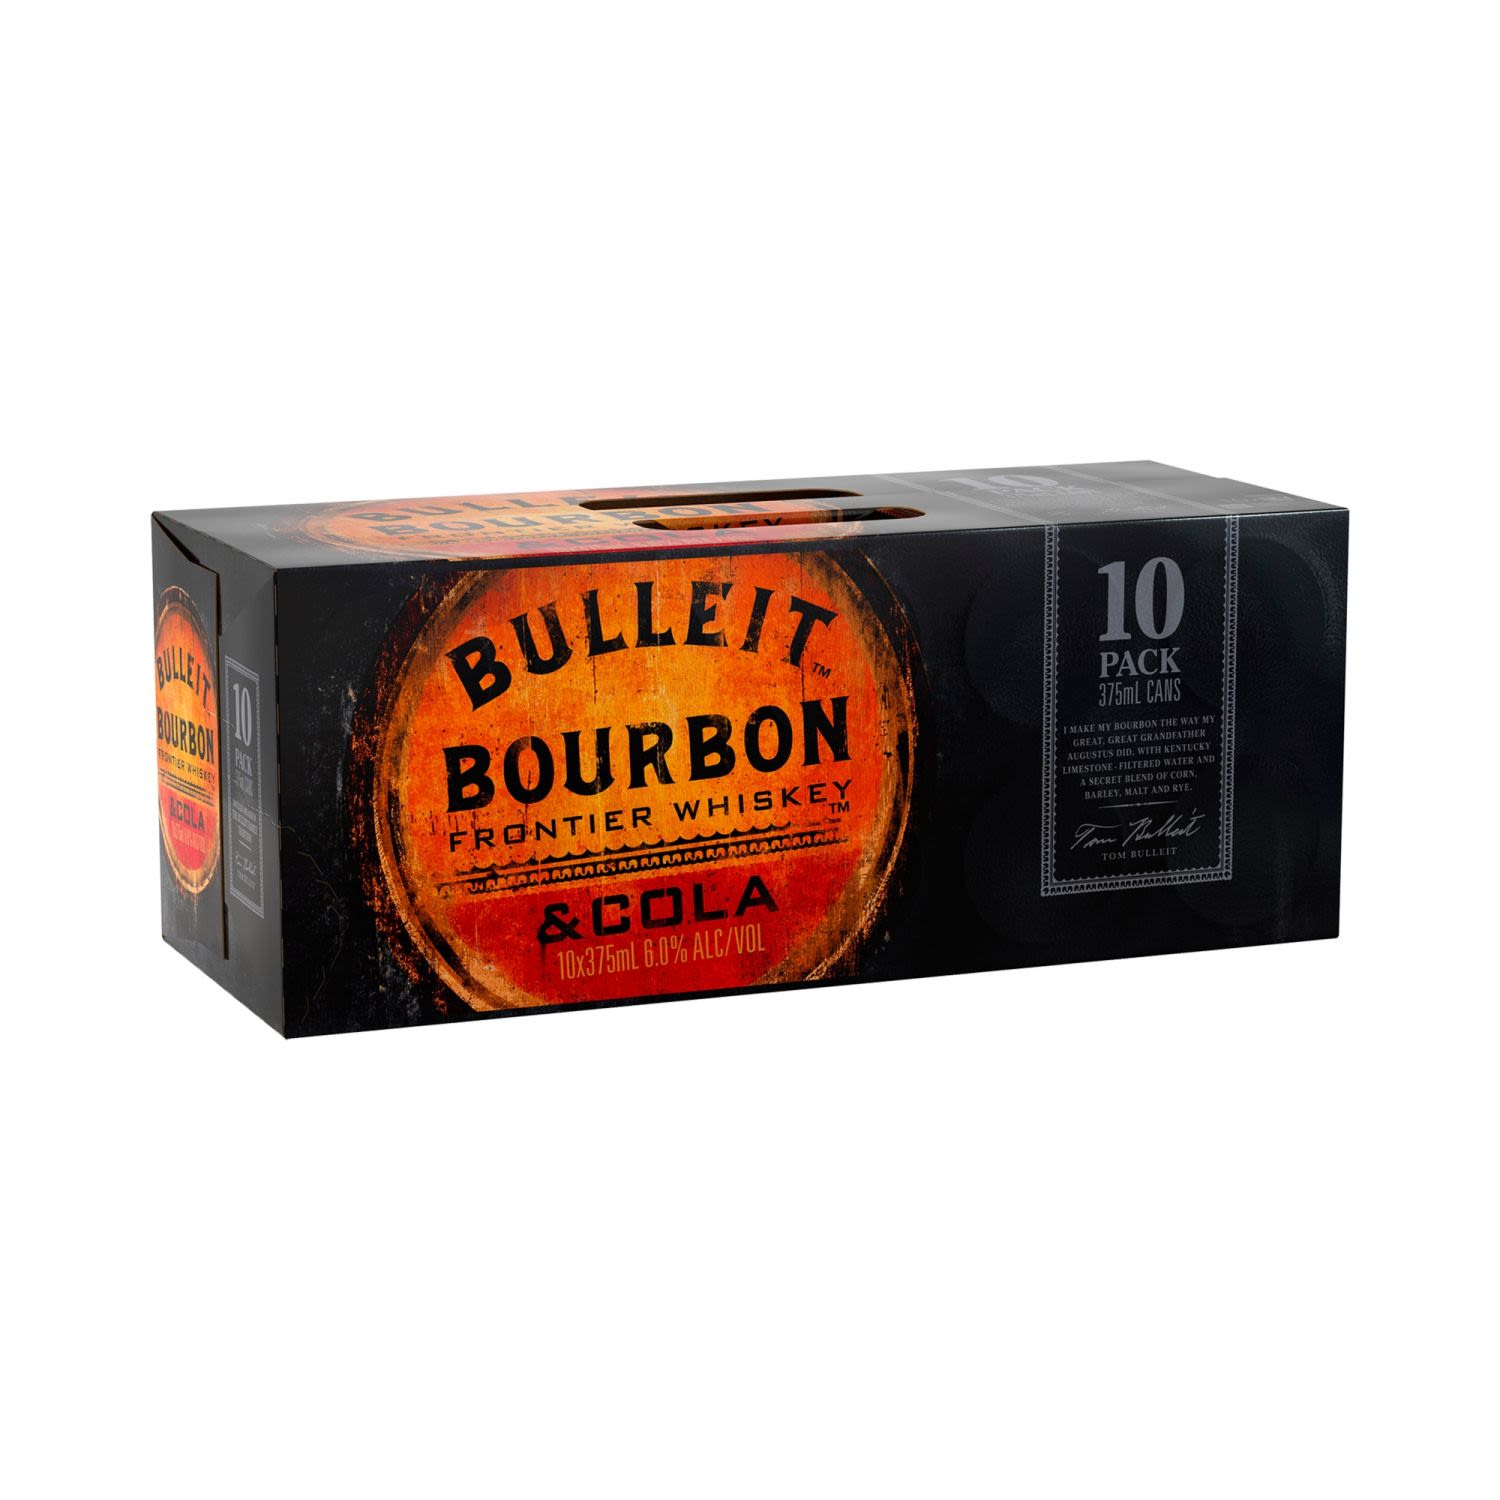 One of the driest of all bourbons, delivering a full-bodied and spicy taste with a long, smooth finish. Now pre-mixed in a can with cola ready for your convenience and enjoyment.<br /> <br />Alcohol Volume: 6.00%<br /><br />Pack Format: 10 Pack<br /><br />Standard Drinks: 1.8</br /><br />Pack Type: Can<br />